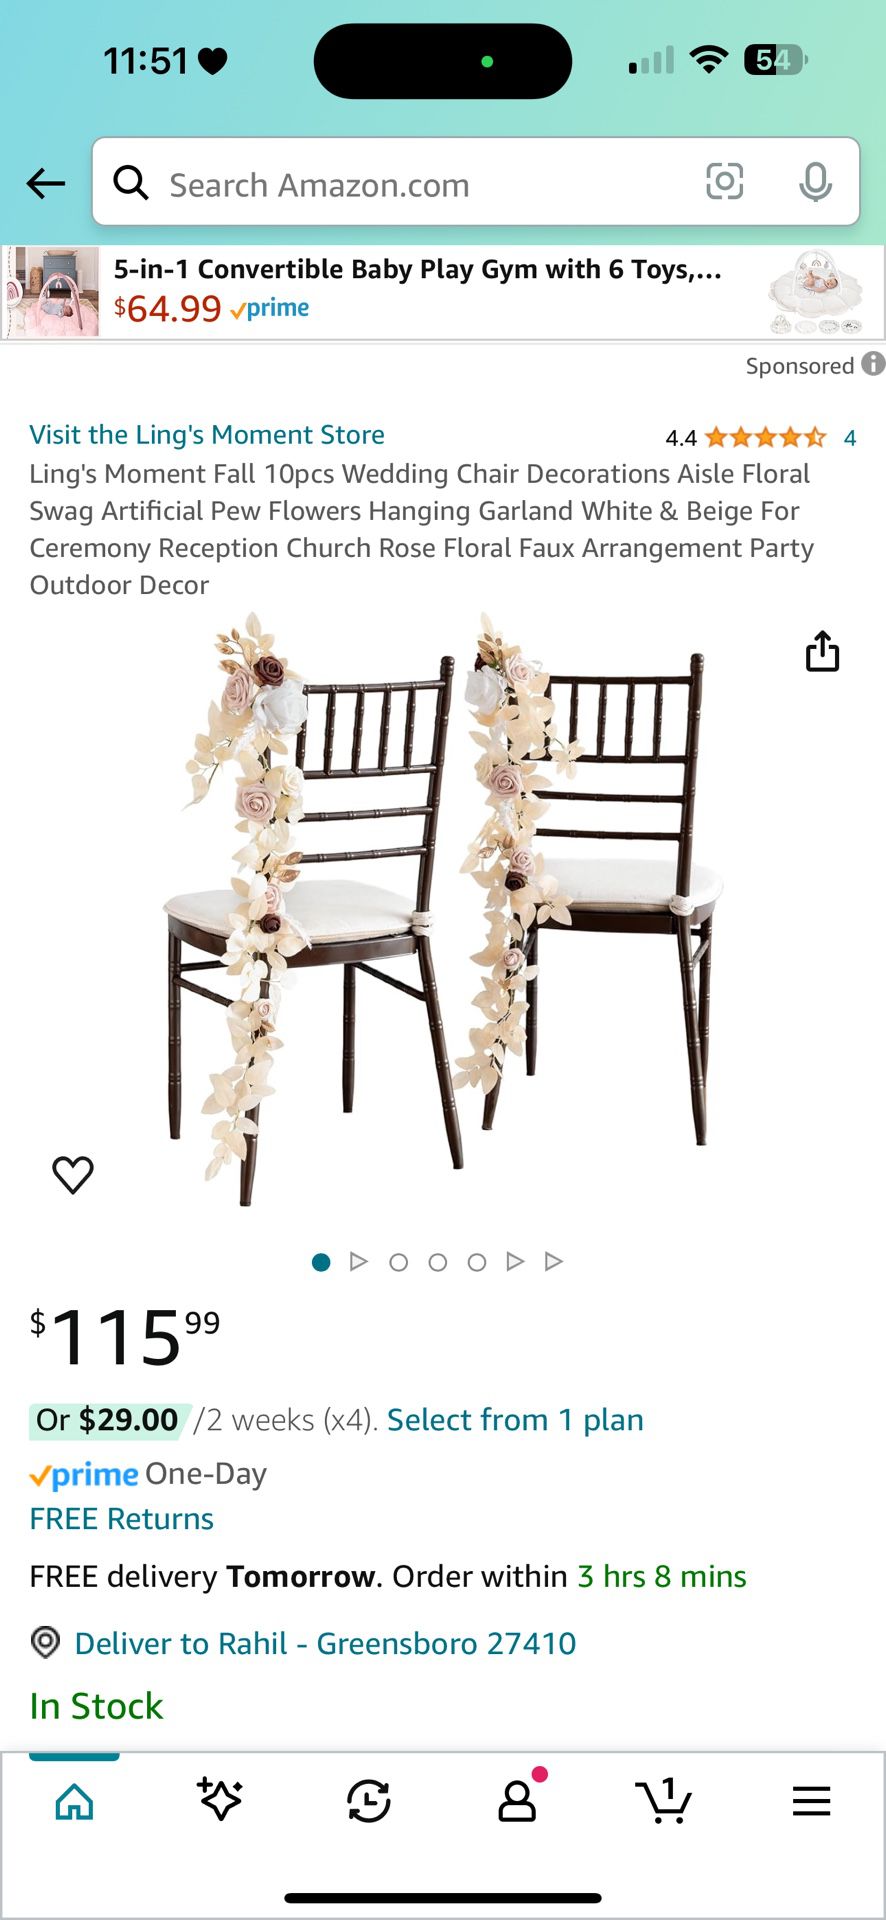 Ling's Moment Fall 10pcs Wedding Chair Decorations Aisle Floral Swag Artificial Pew Flowers Hanging Garland White & Beige For Ceremony Reception Churc